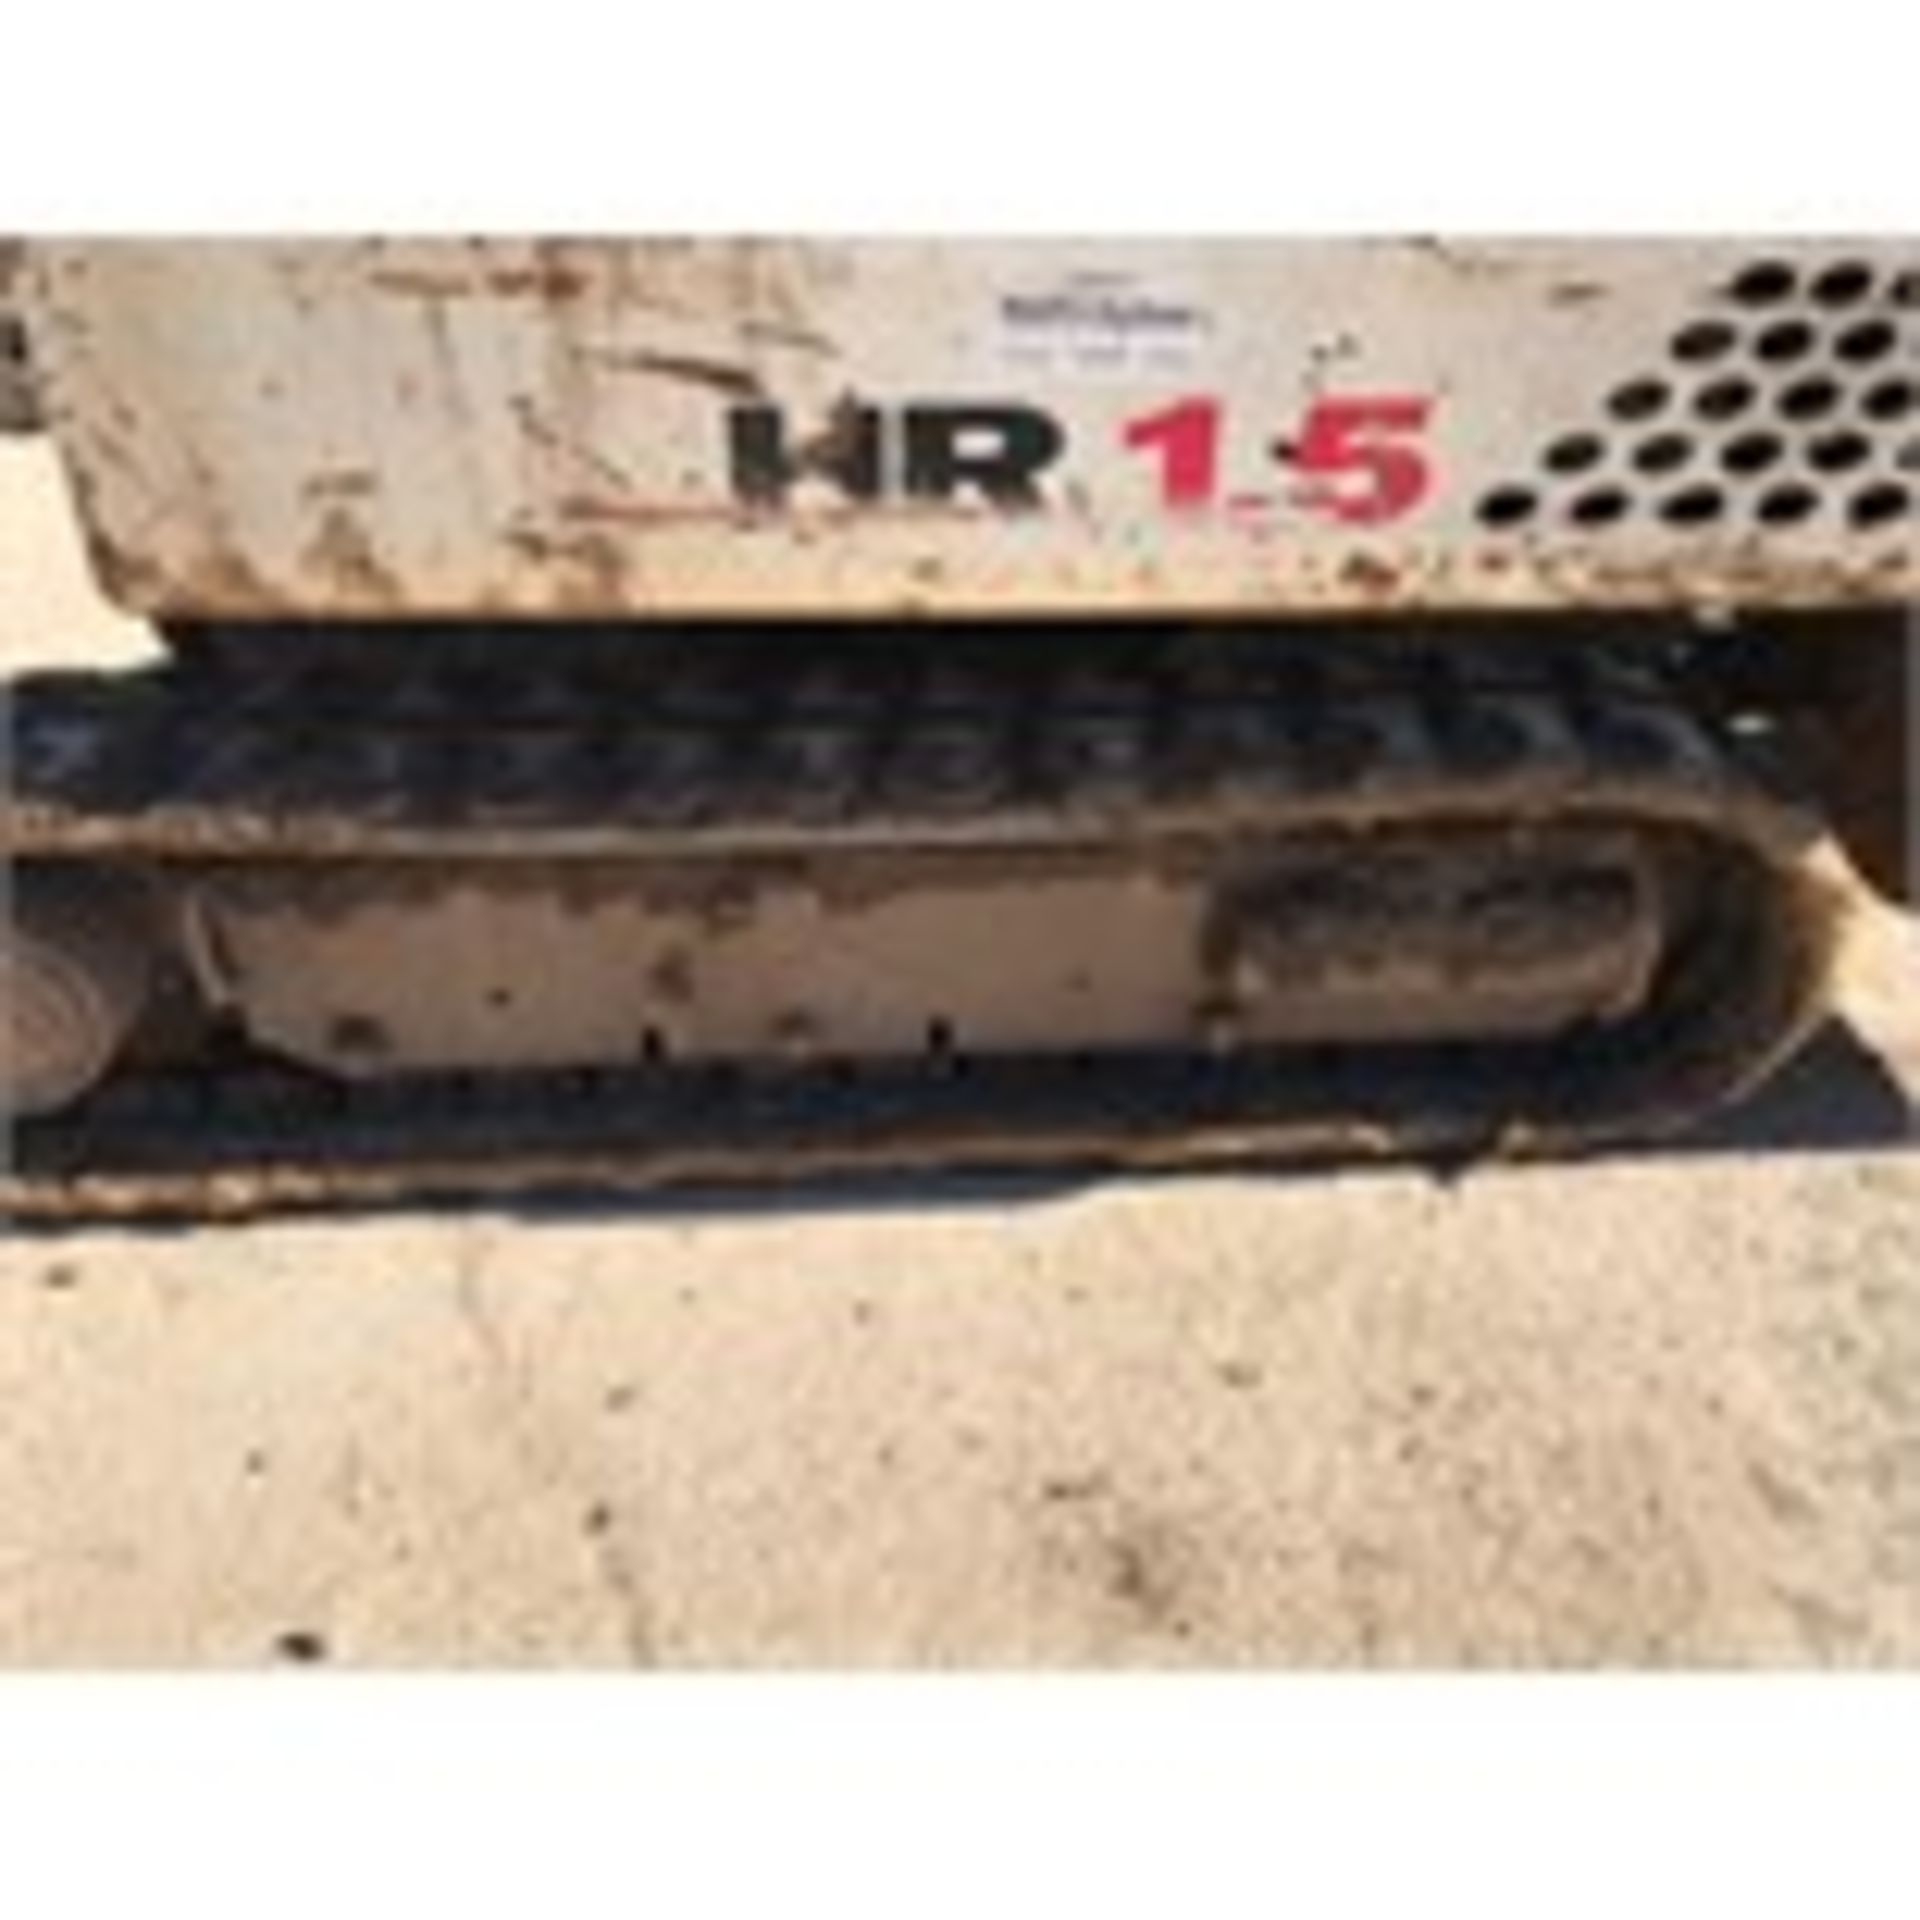 TEREX HR 1.5 MINI DIGGER WITH GRAB & HAMMER CONNECTIONS - 2005 (+VAT) - Image 10 of 14